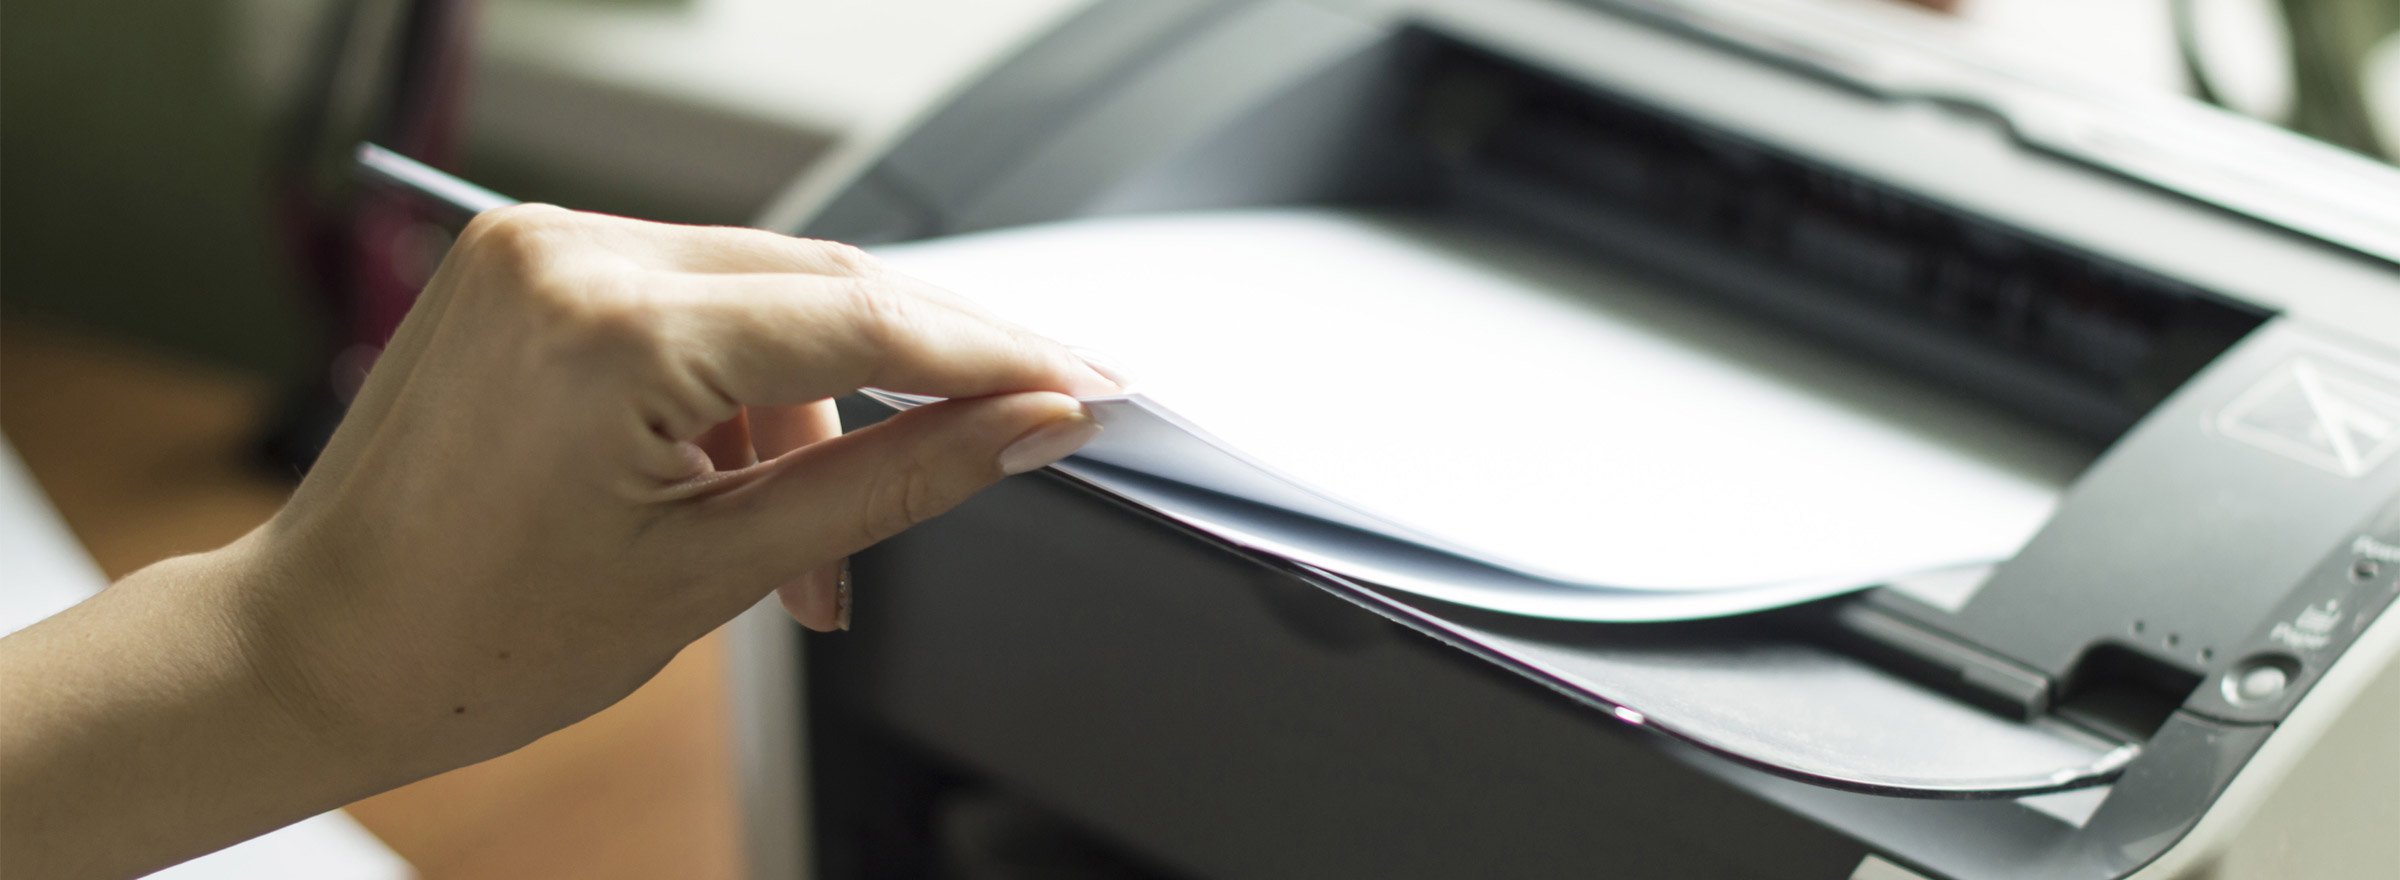 hand removing pages from a printer